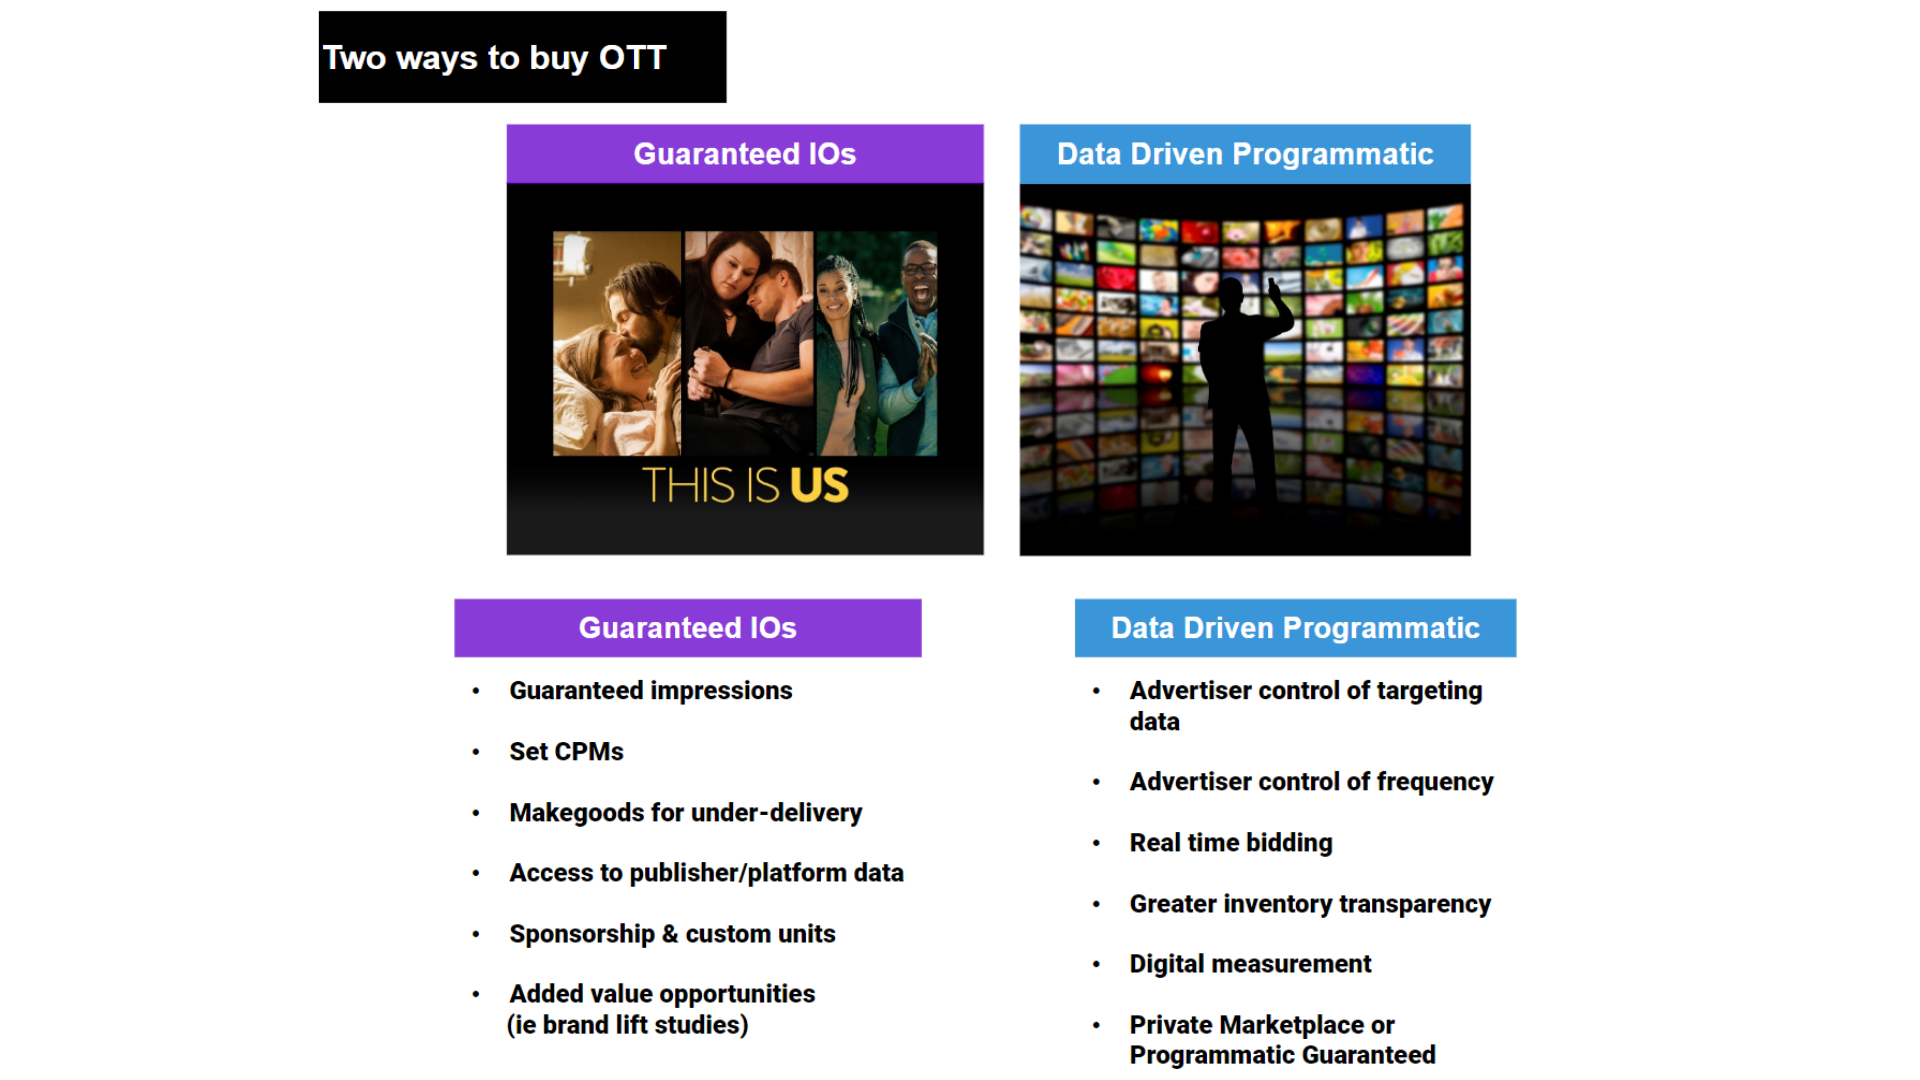 the two ways to buy ott advertising